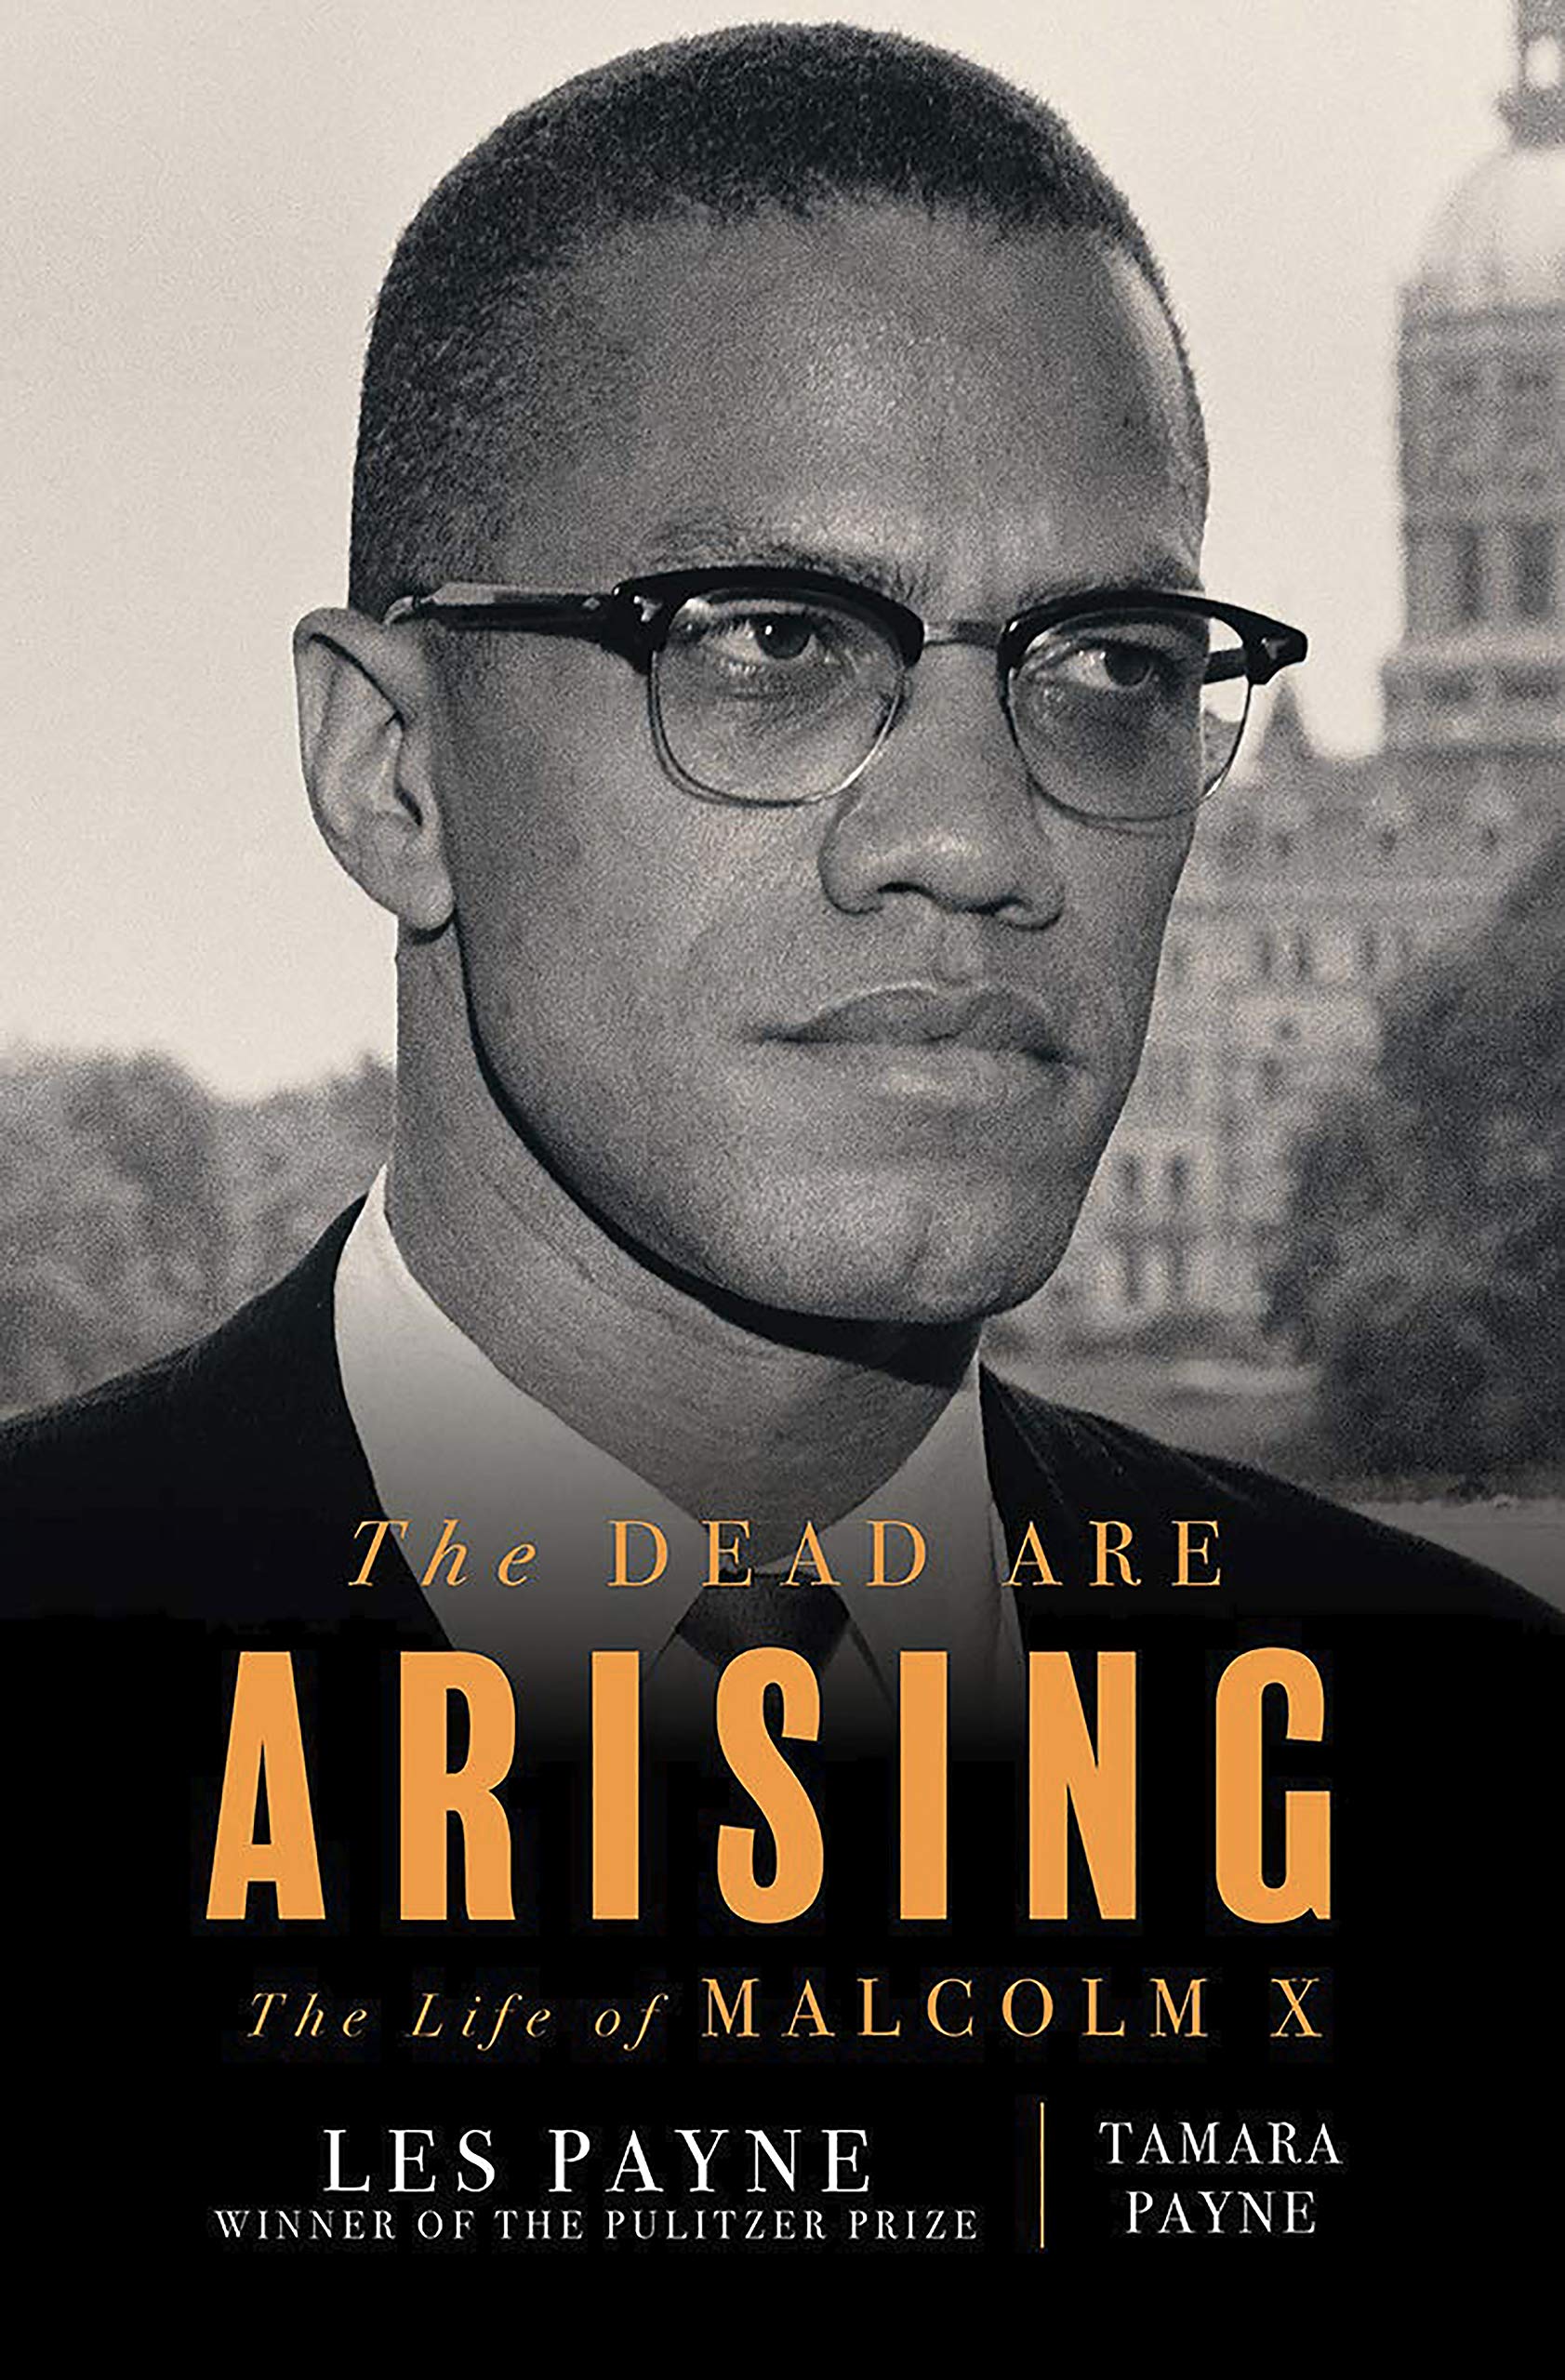 The Dead Are Arising: The Life of Malcom X